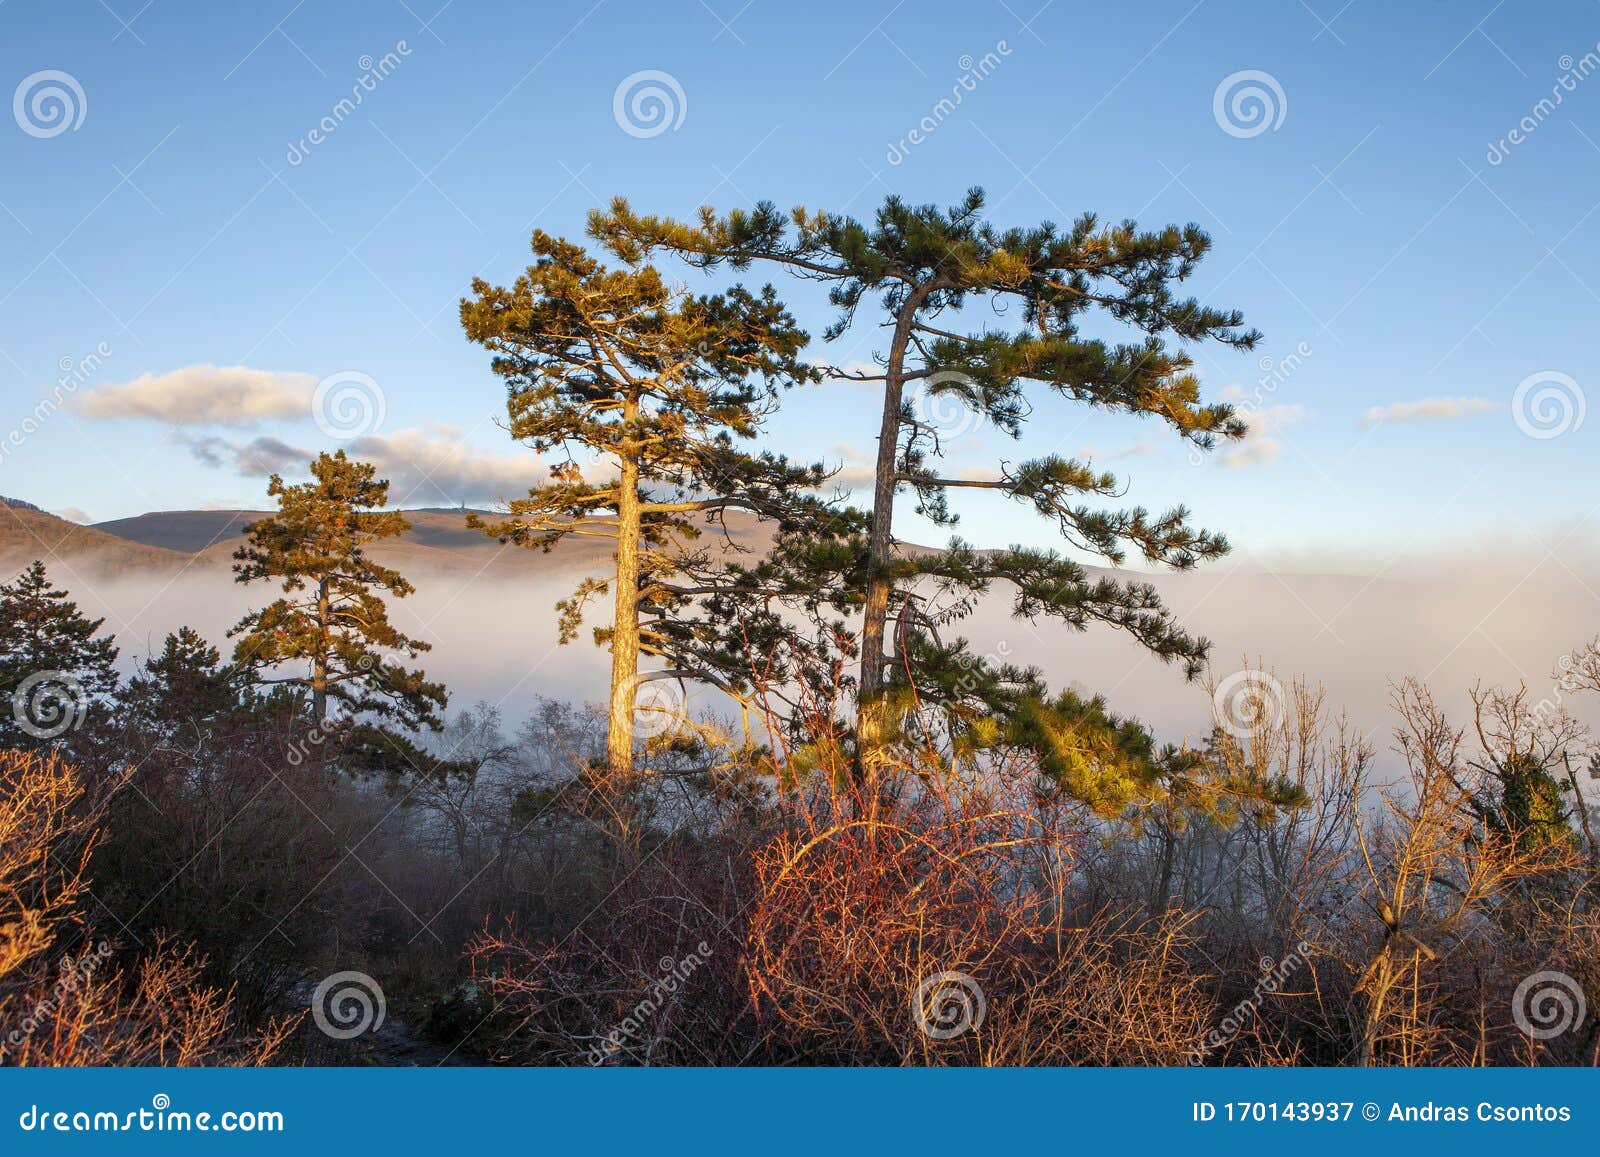 Beautiful Misty Autumn In The Forest With Pine Trees Mountains And